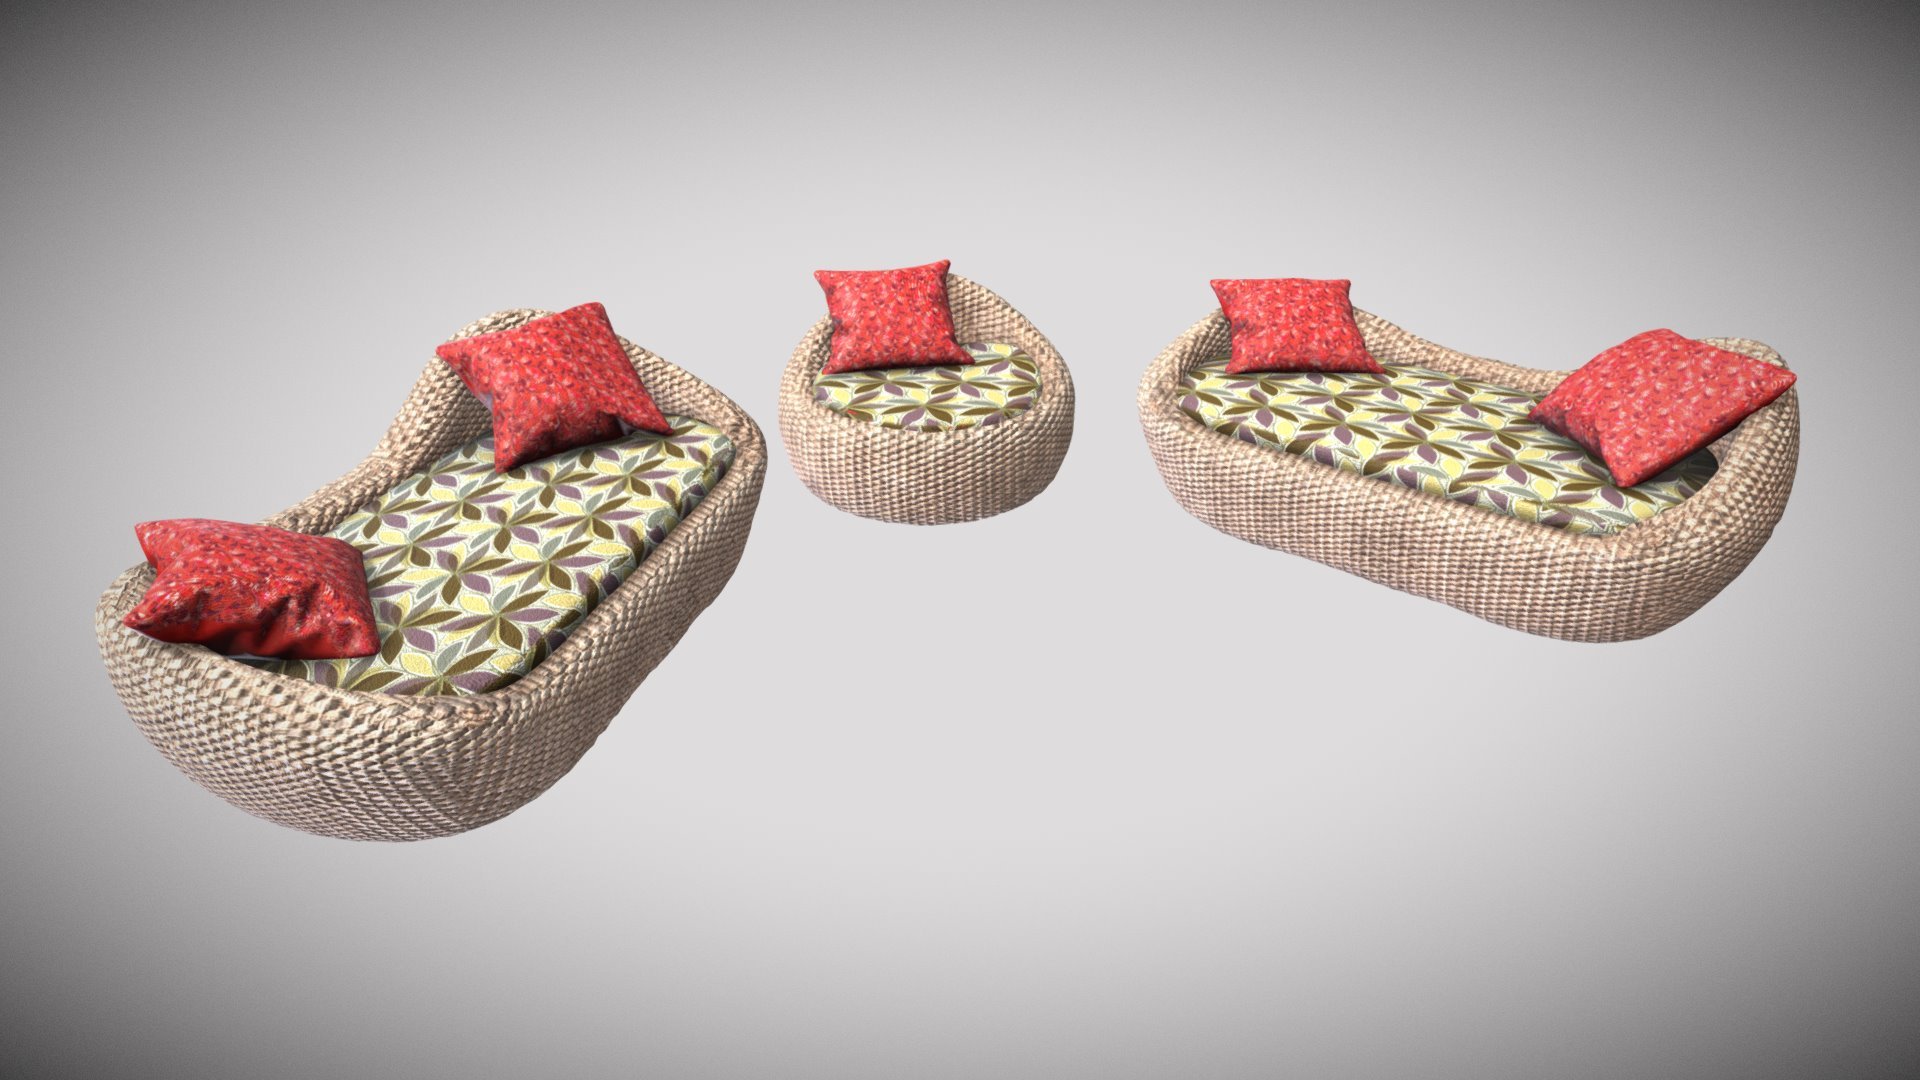 PBR Specular/Glossiness - 1 Material 4k  + 1 Material 2k for Fabrics  




Diffuse  

Gloss  

Normal  

Specular 

Ambient Occlusion
 - Rattan Set - Buy Royalty Free 3D model by Francesco Coldesina (@topfrank2013) 3d model